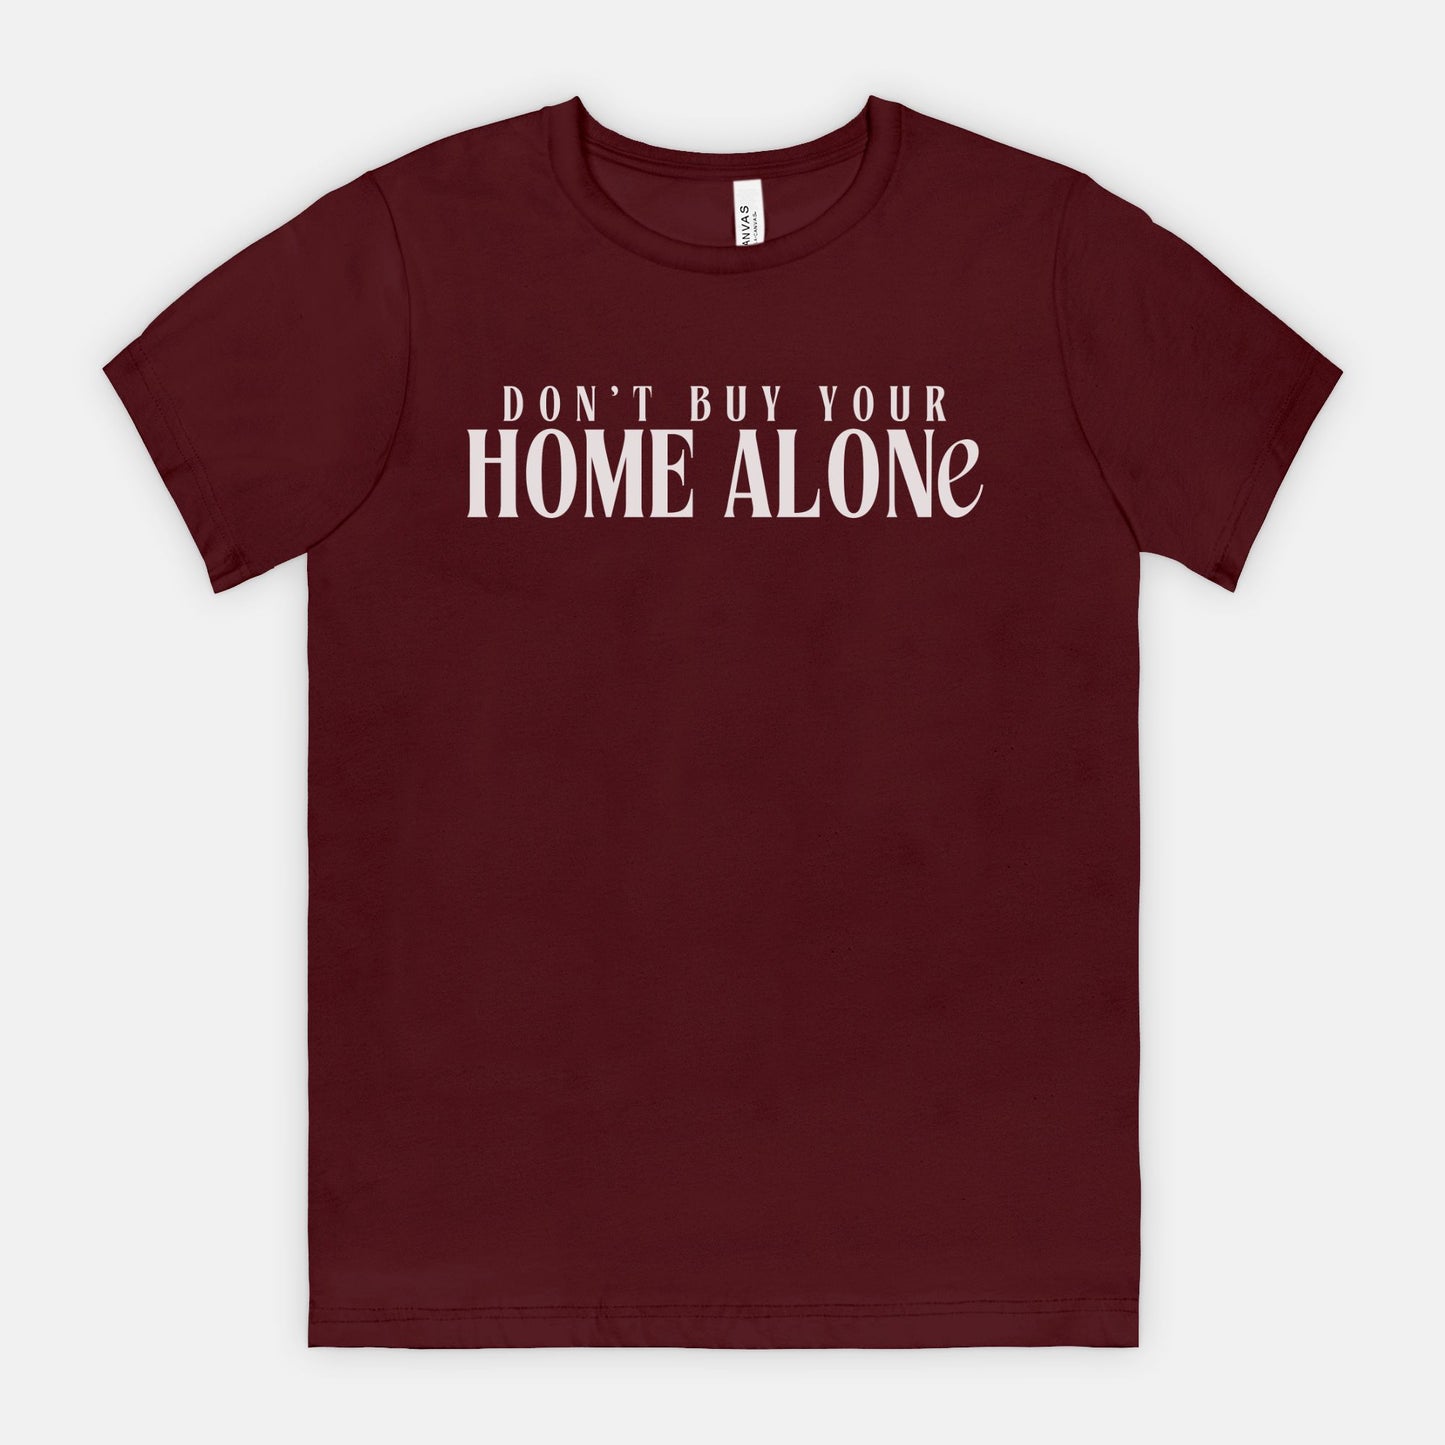 Home Alone Tee Front and Back